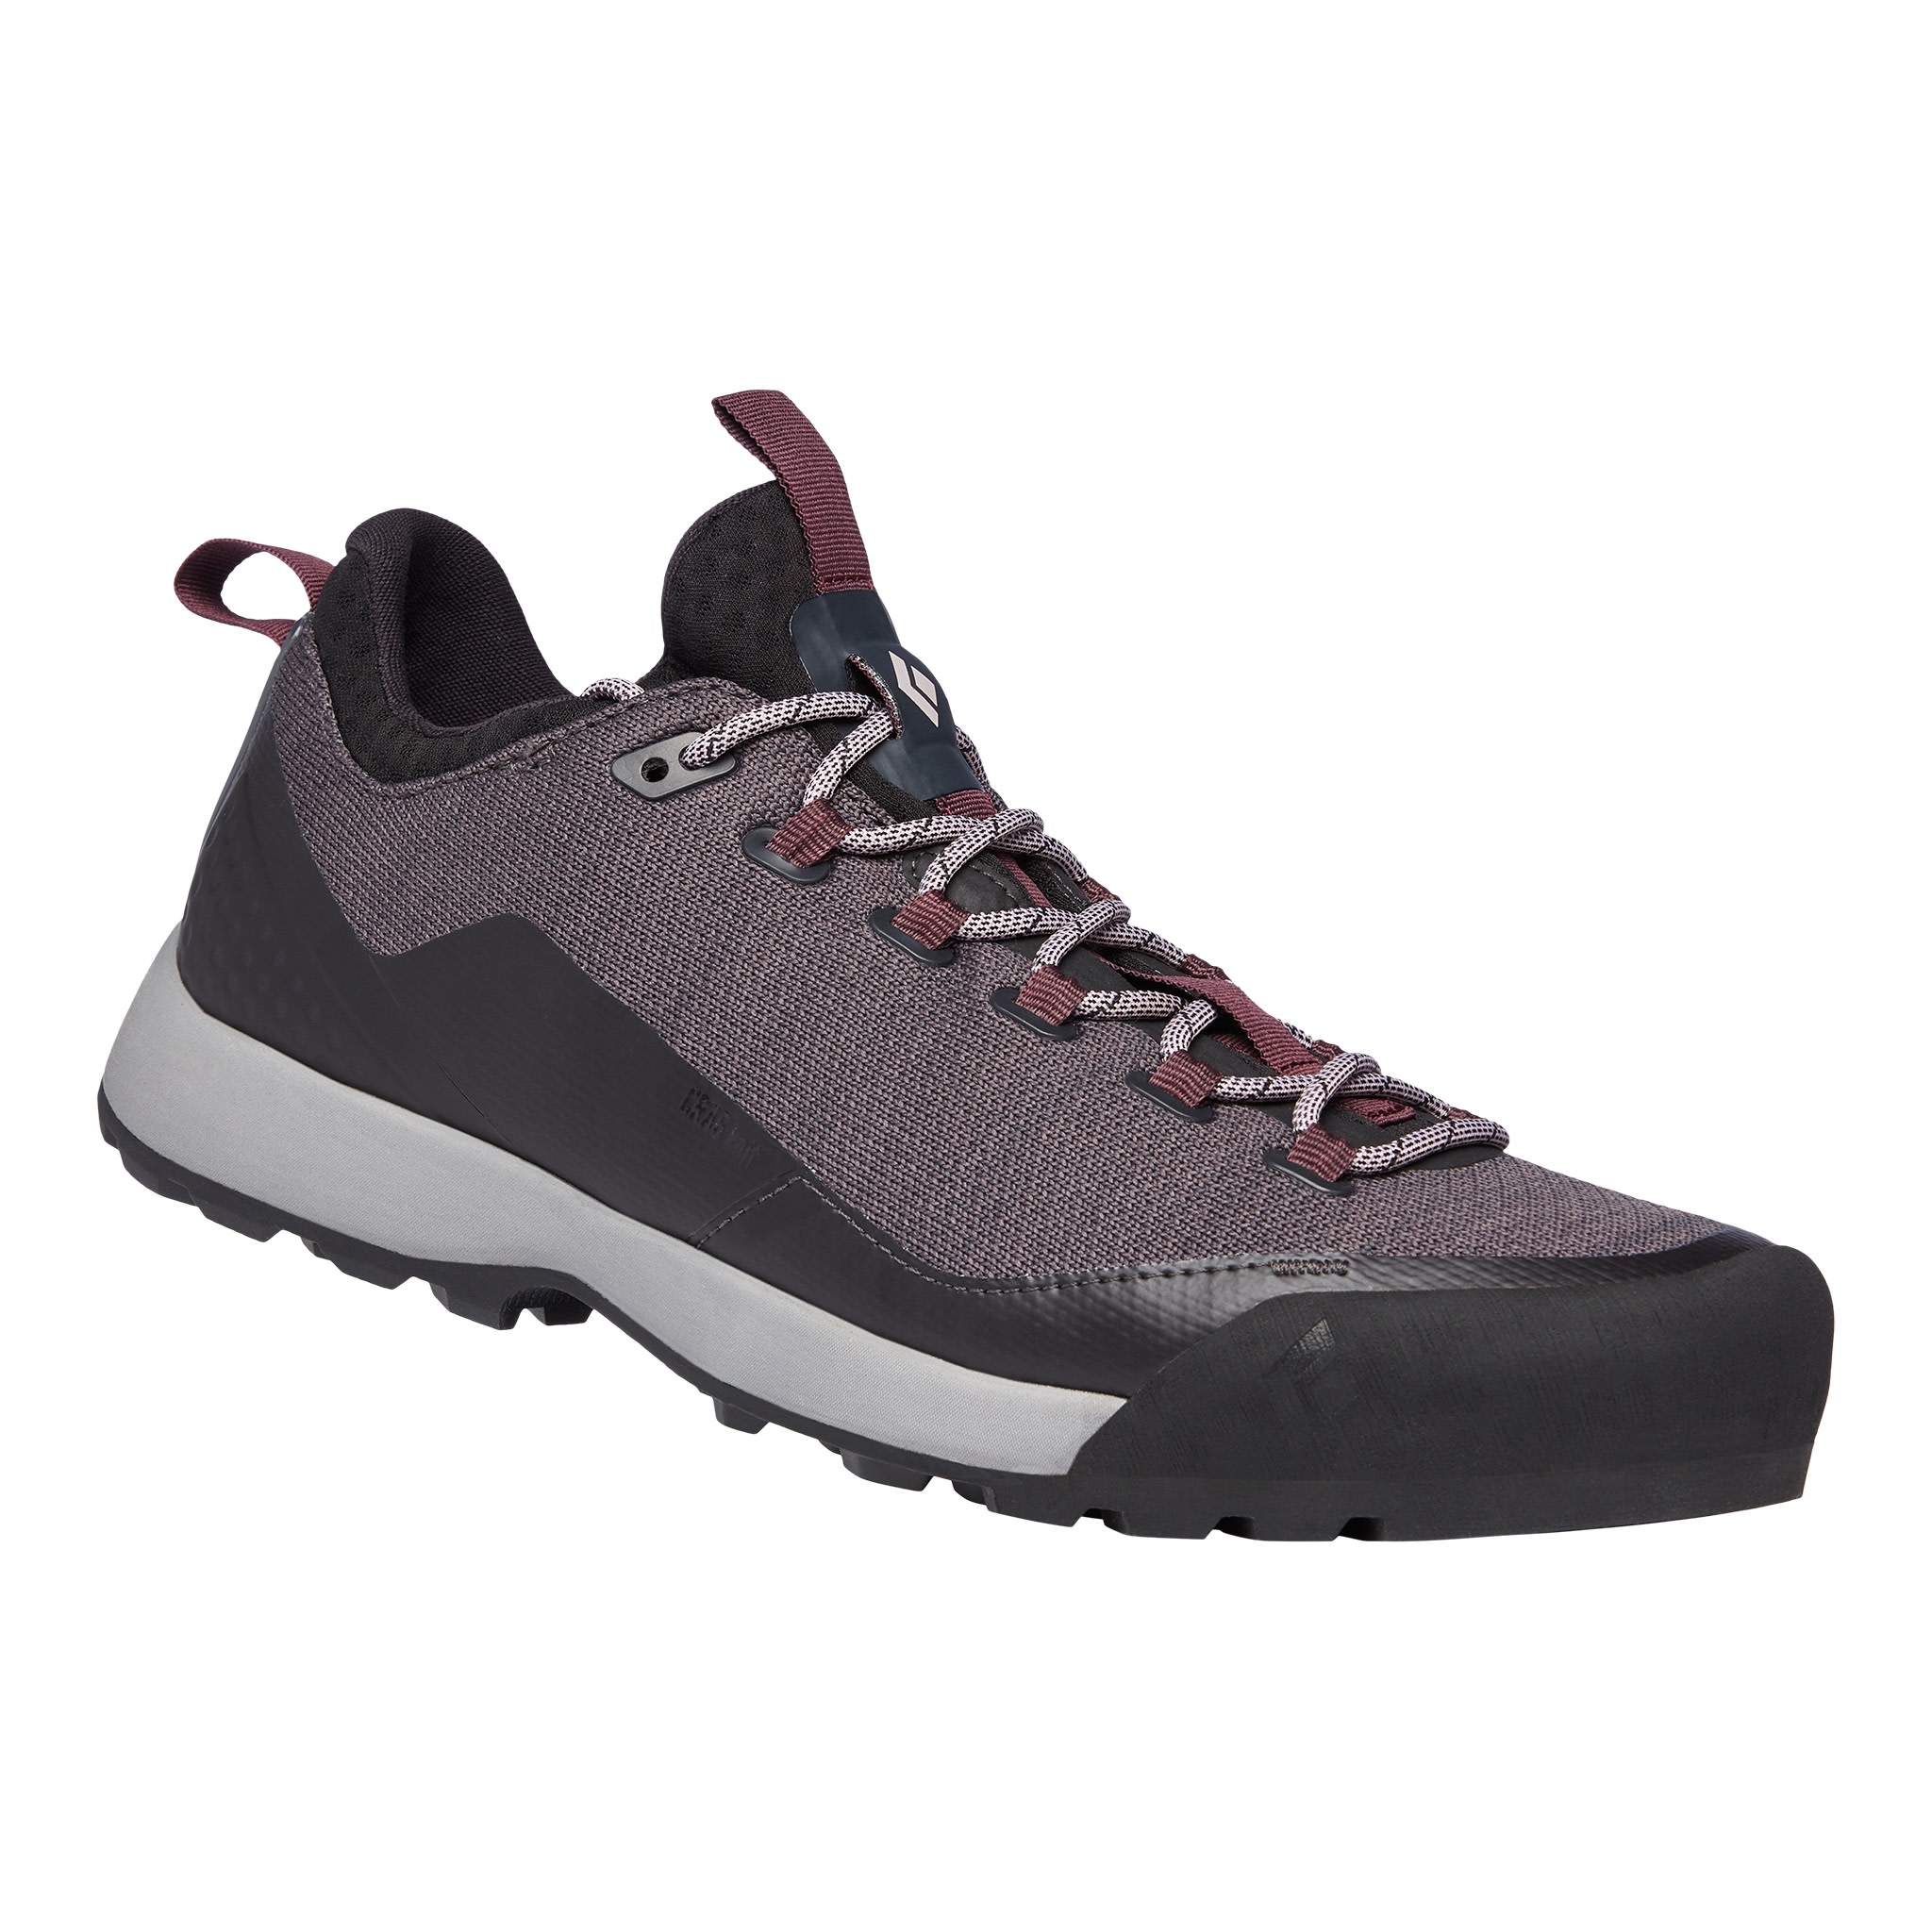 Black Diamond Women's Mission LT Approach Shoes Anthracite-Wisteria